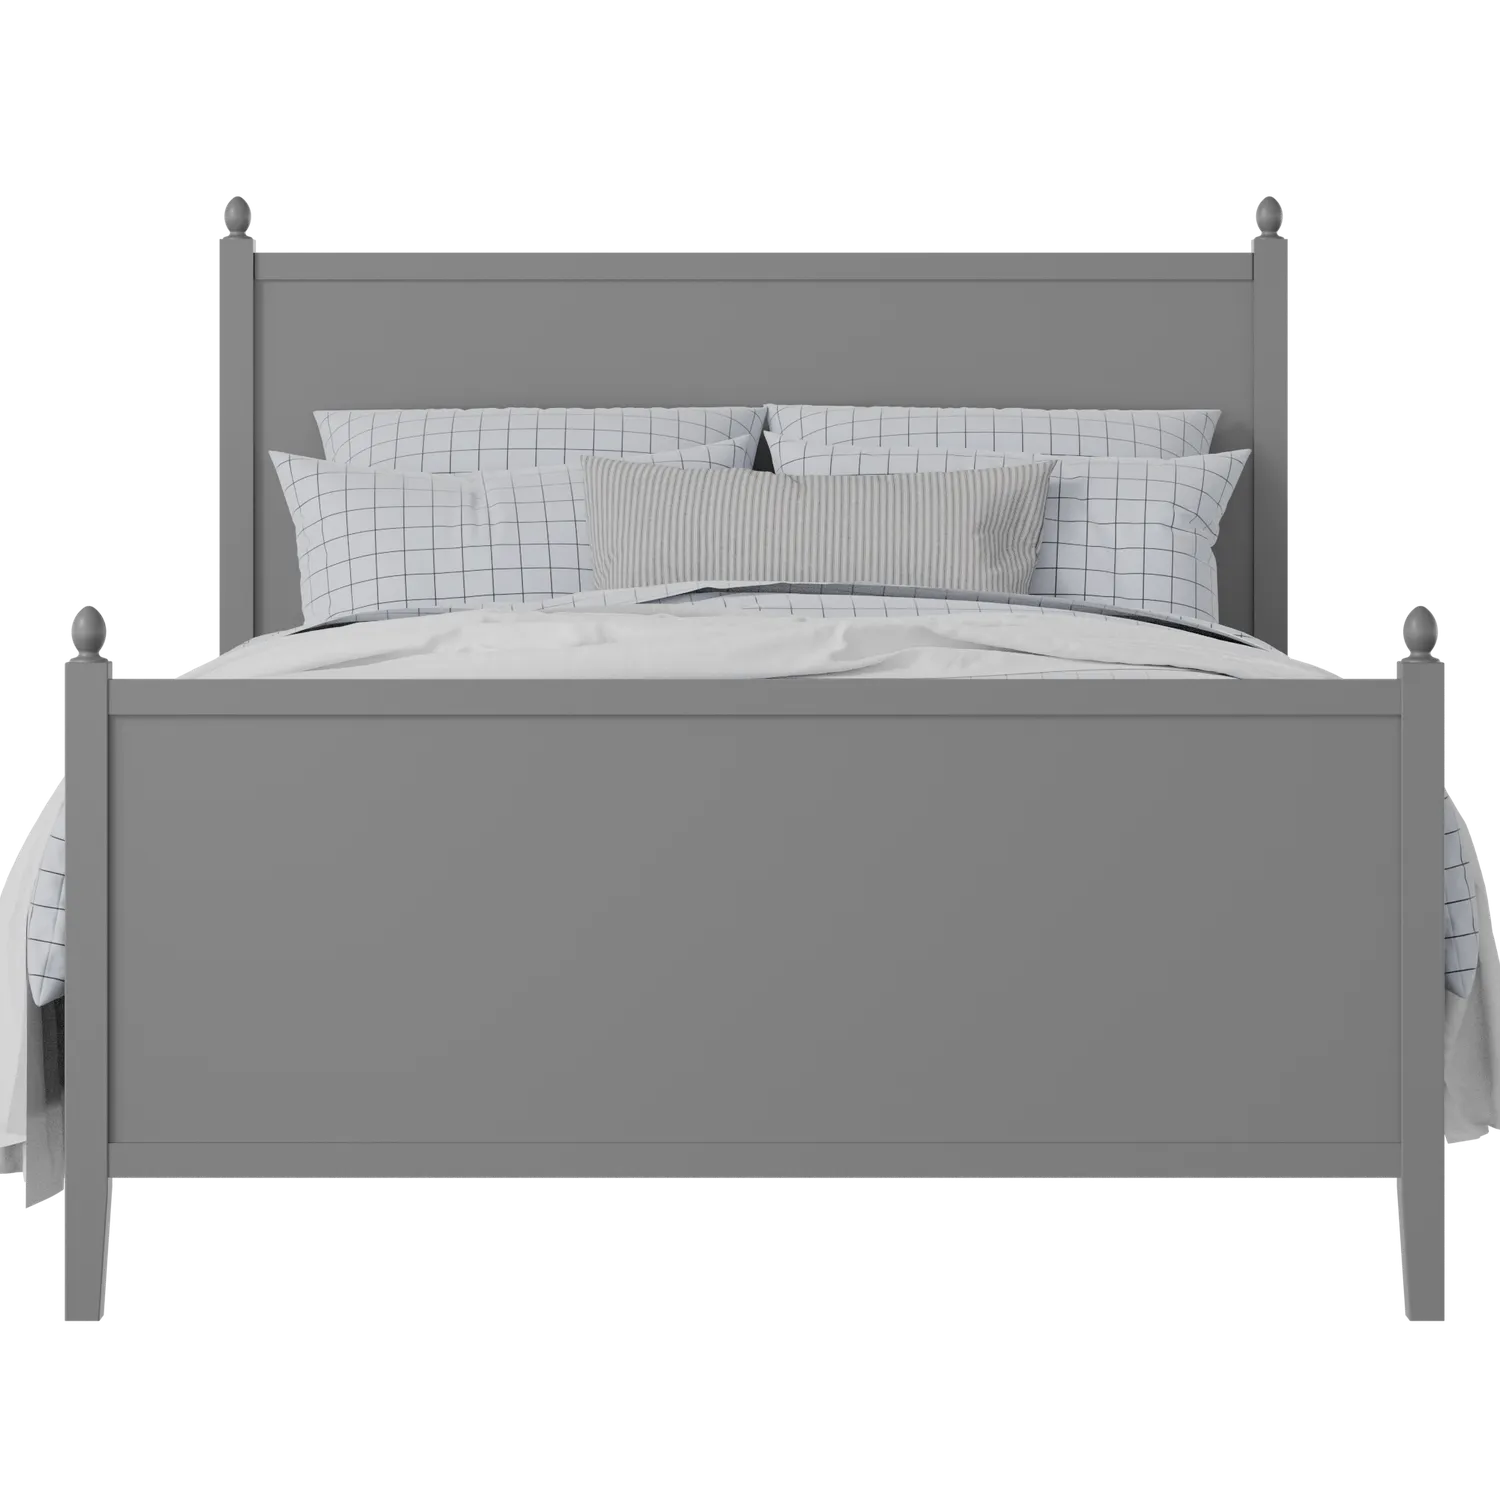 Marbella painted wood bed in grey with Juno mattress